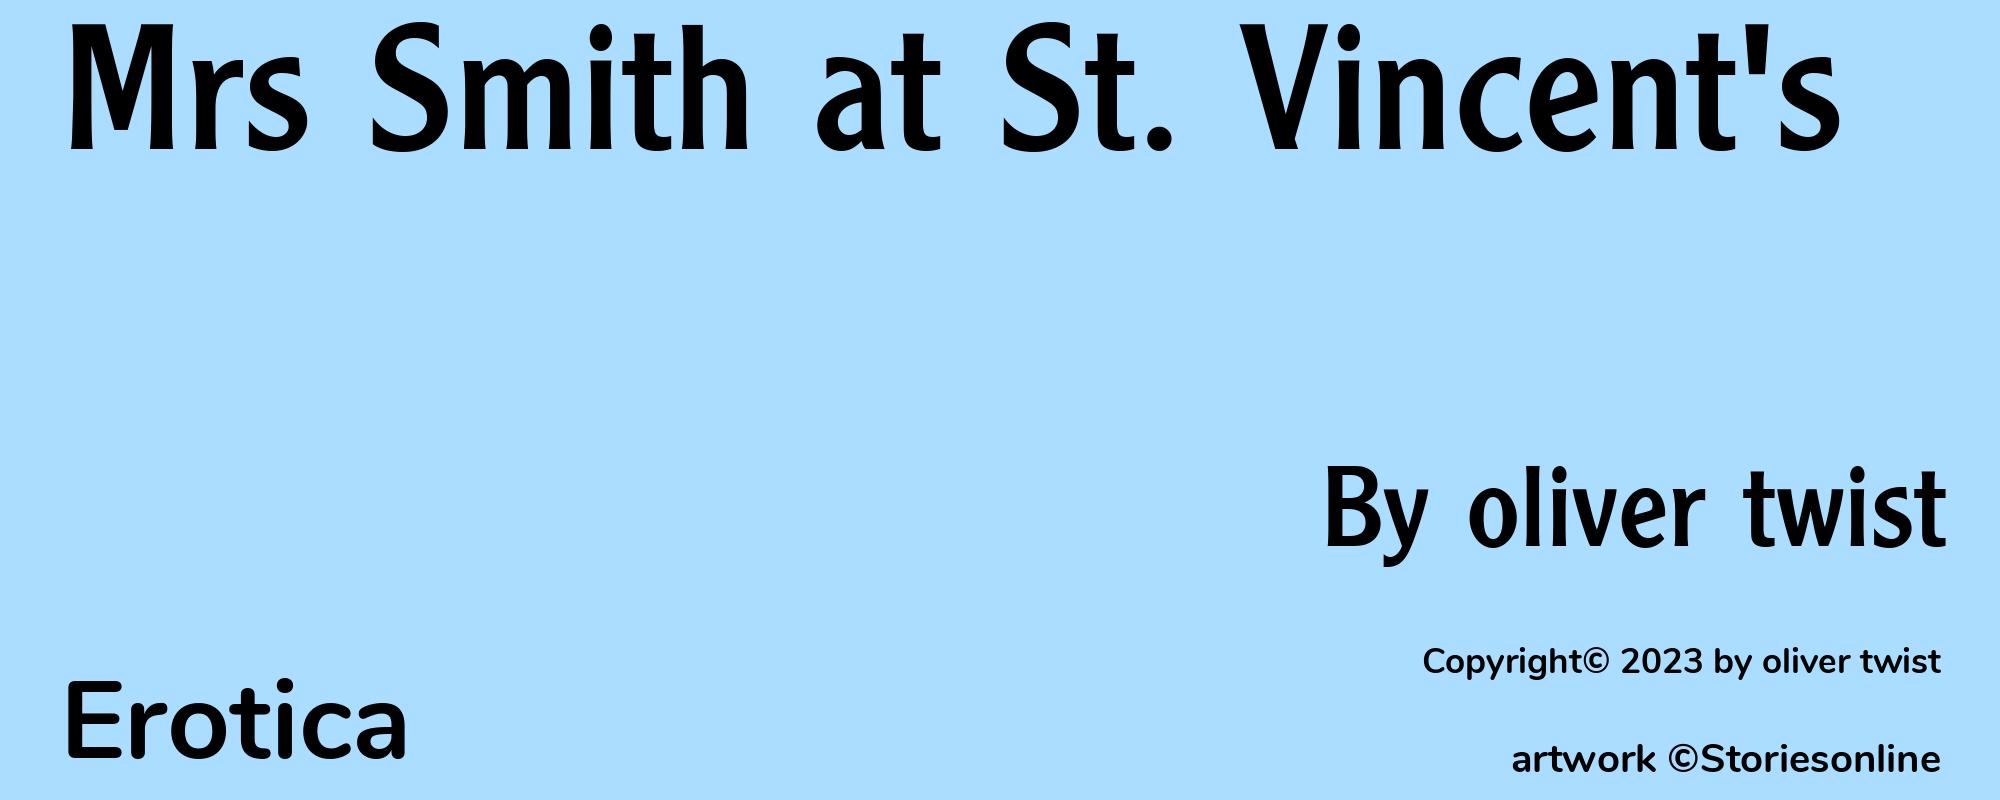 Mrs Smith at St. Vincent's - Cover